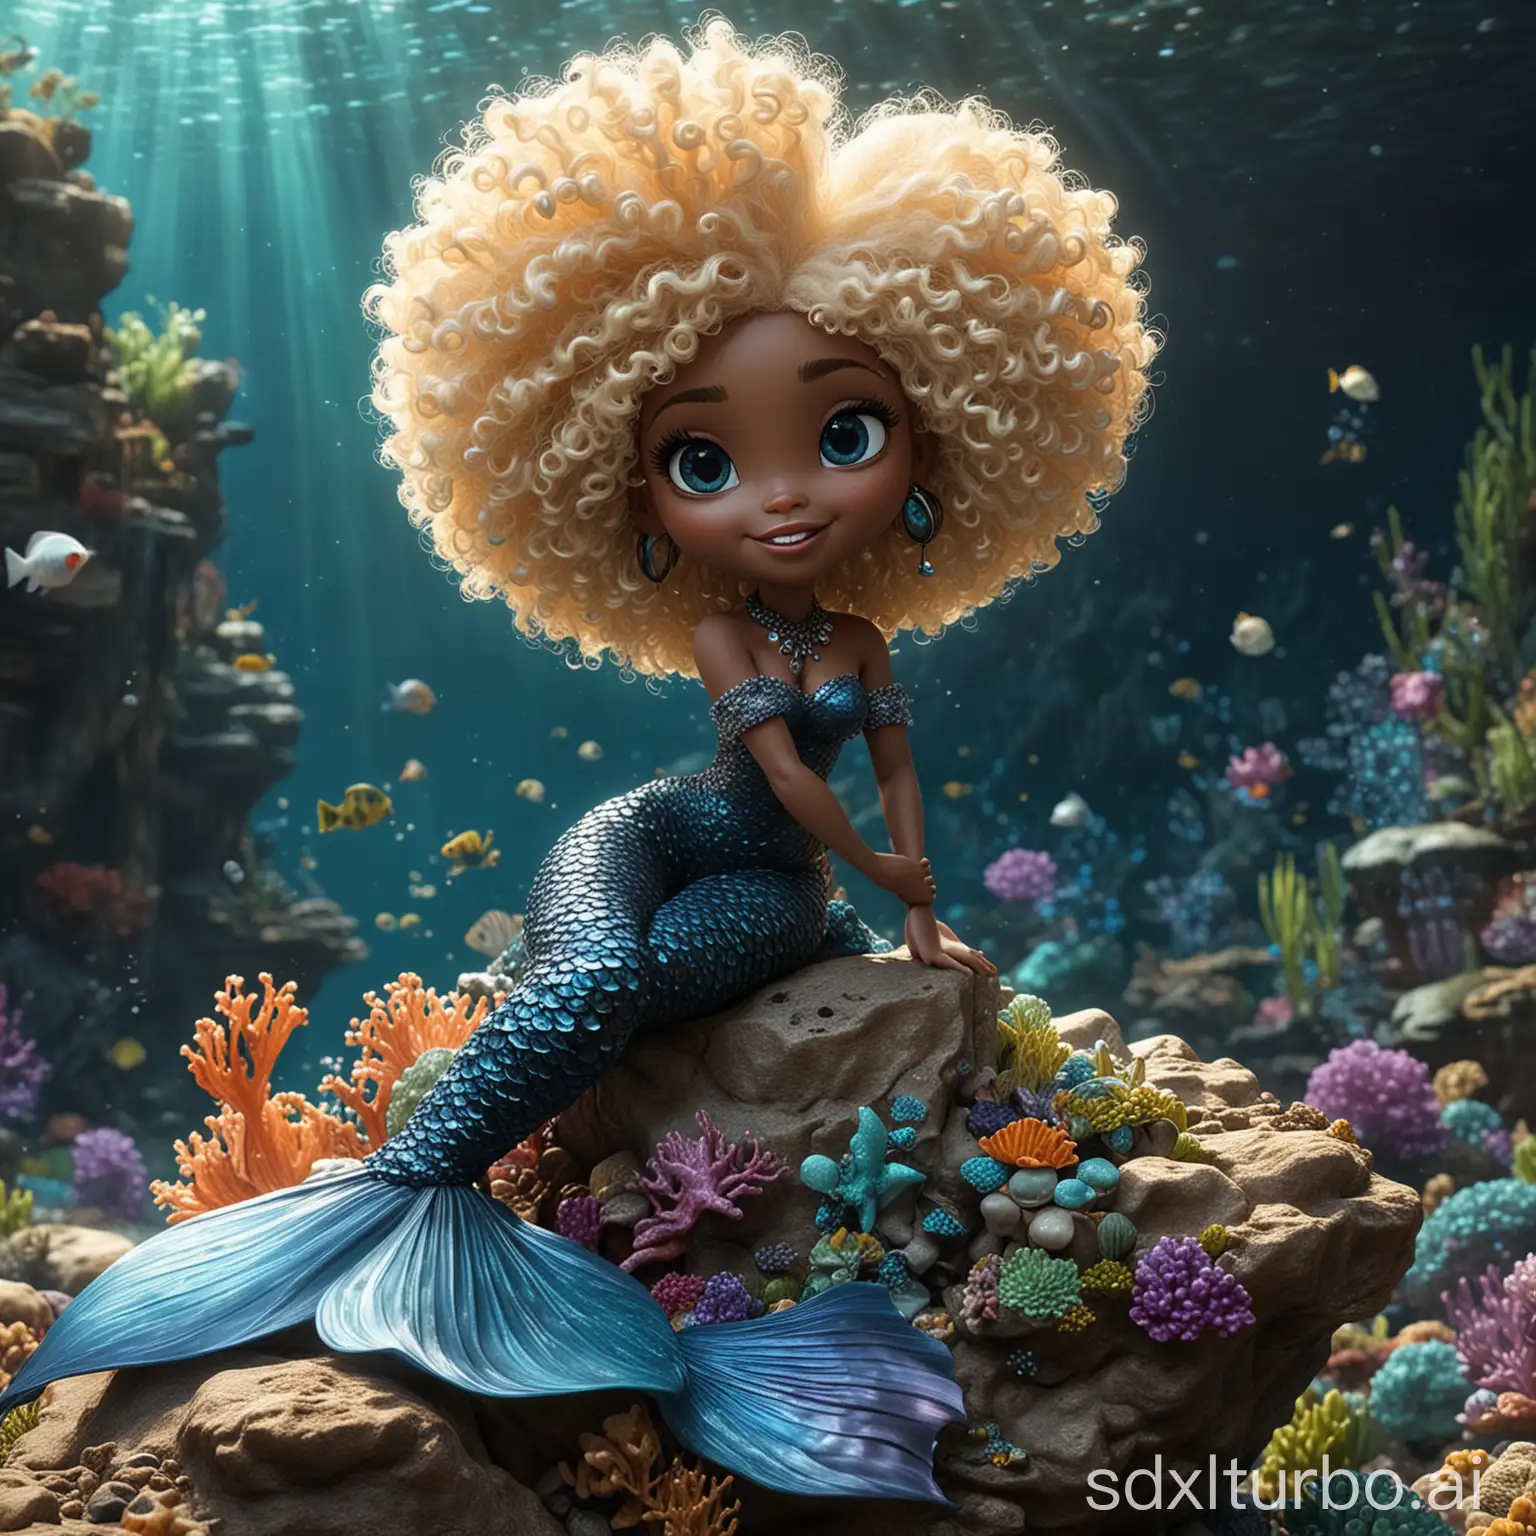 3D Pixar black mermaid with a resplendent big blond afro is perched upon a smooth, rock under the sea. Her fair long mermaid tail float, glistening with pearlescent hues. The mermaid's eyes, shimmering with curiosity and wisdom, gaze out into the endless azure expanse.